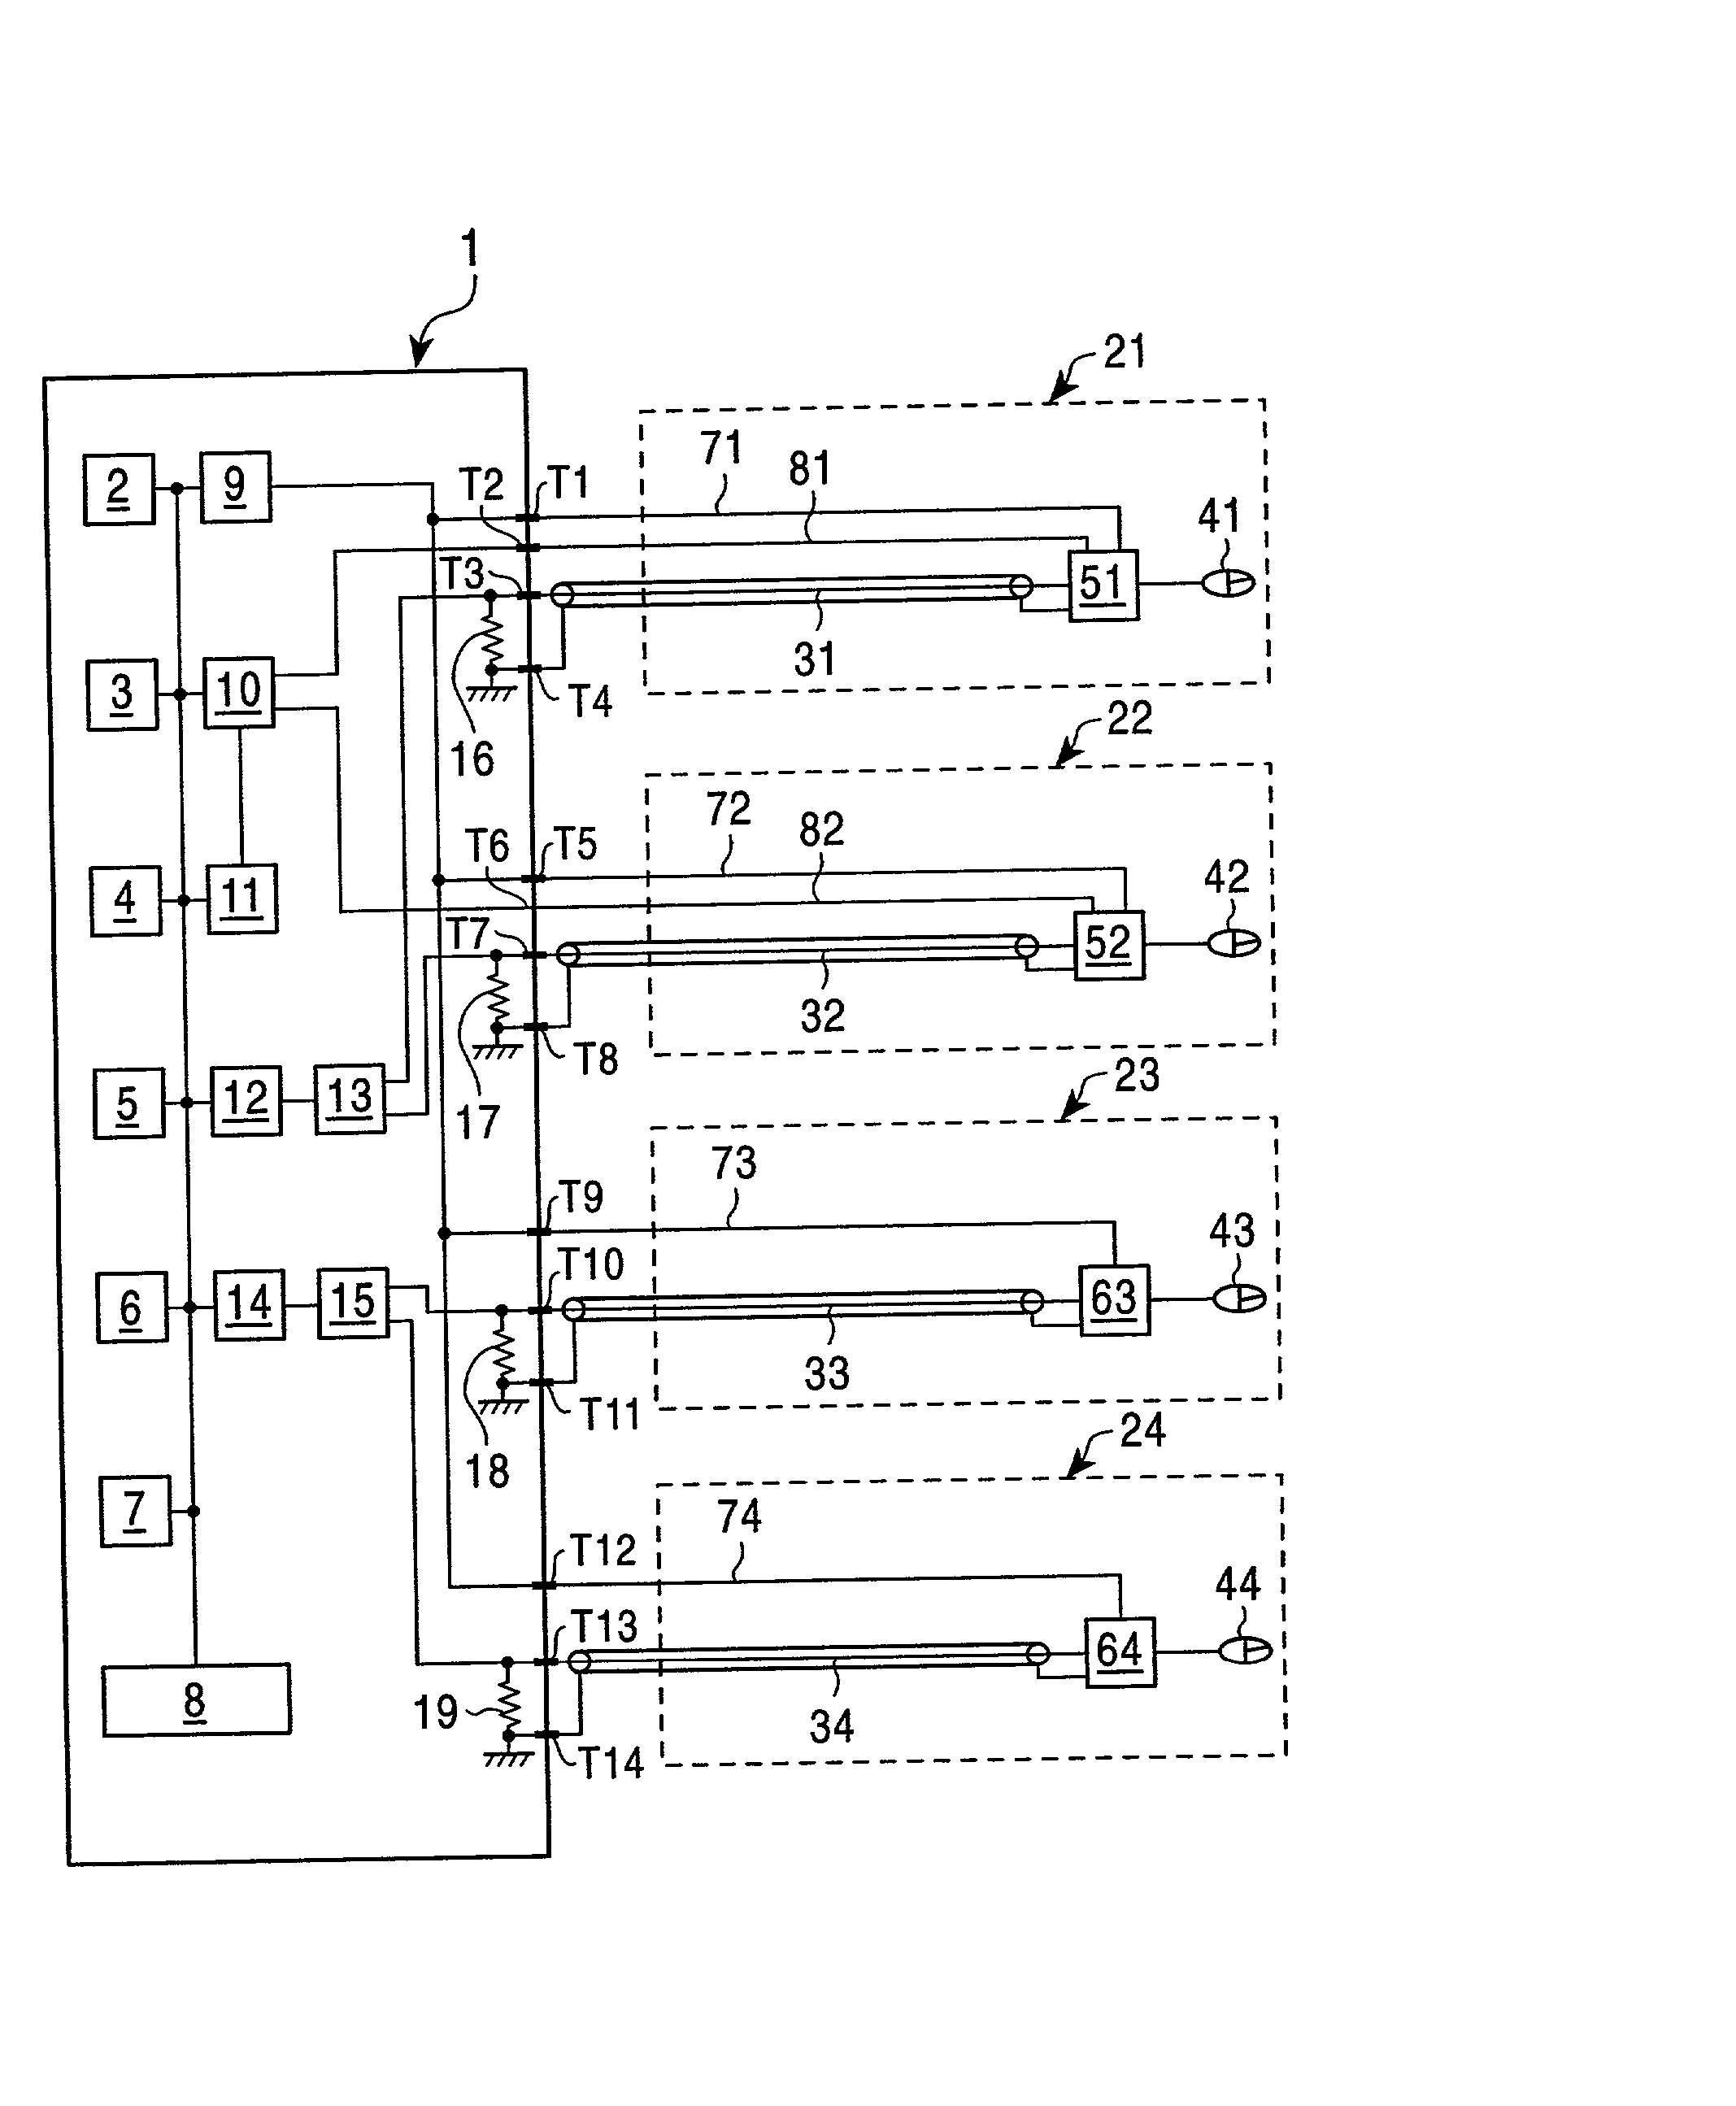 Apparatus for measuring the bioelectrical impedance of a living body